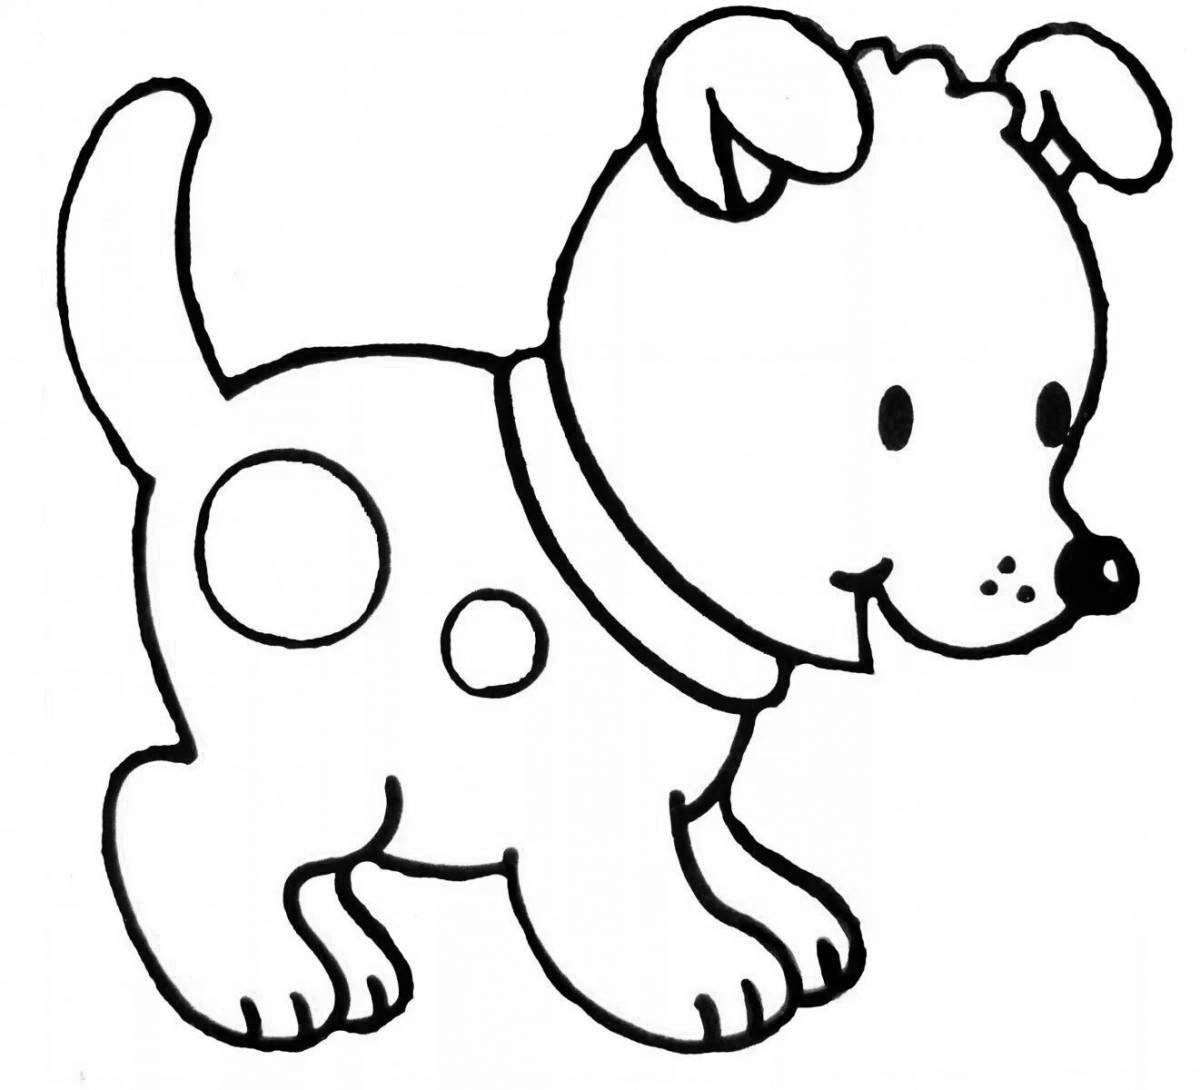 Adorable dog coloring book for 2-3 year olds